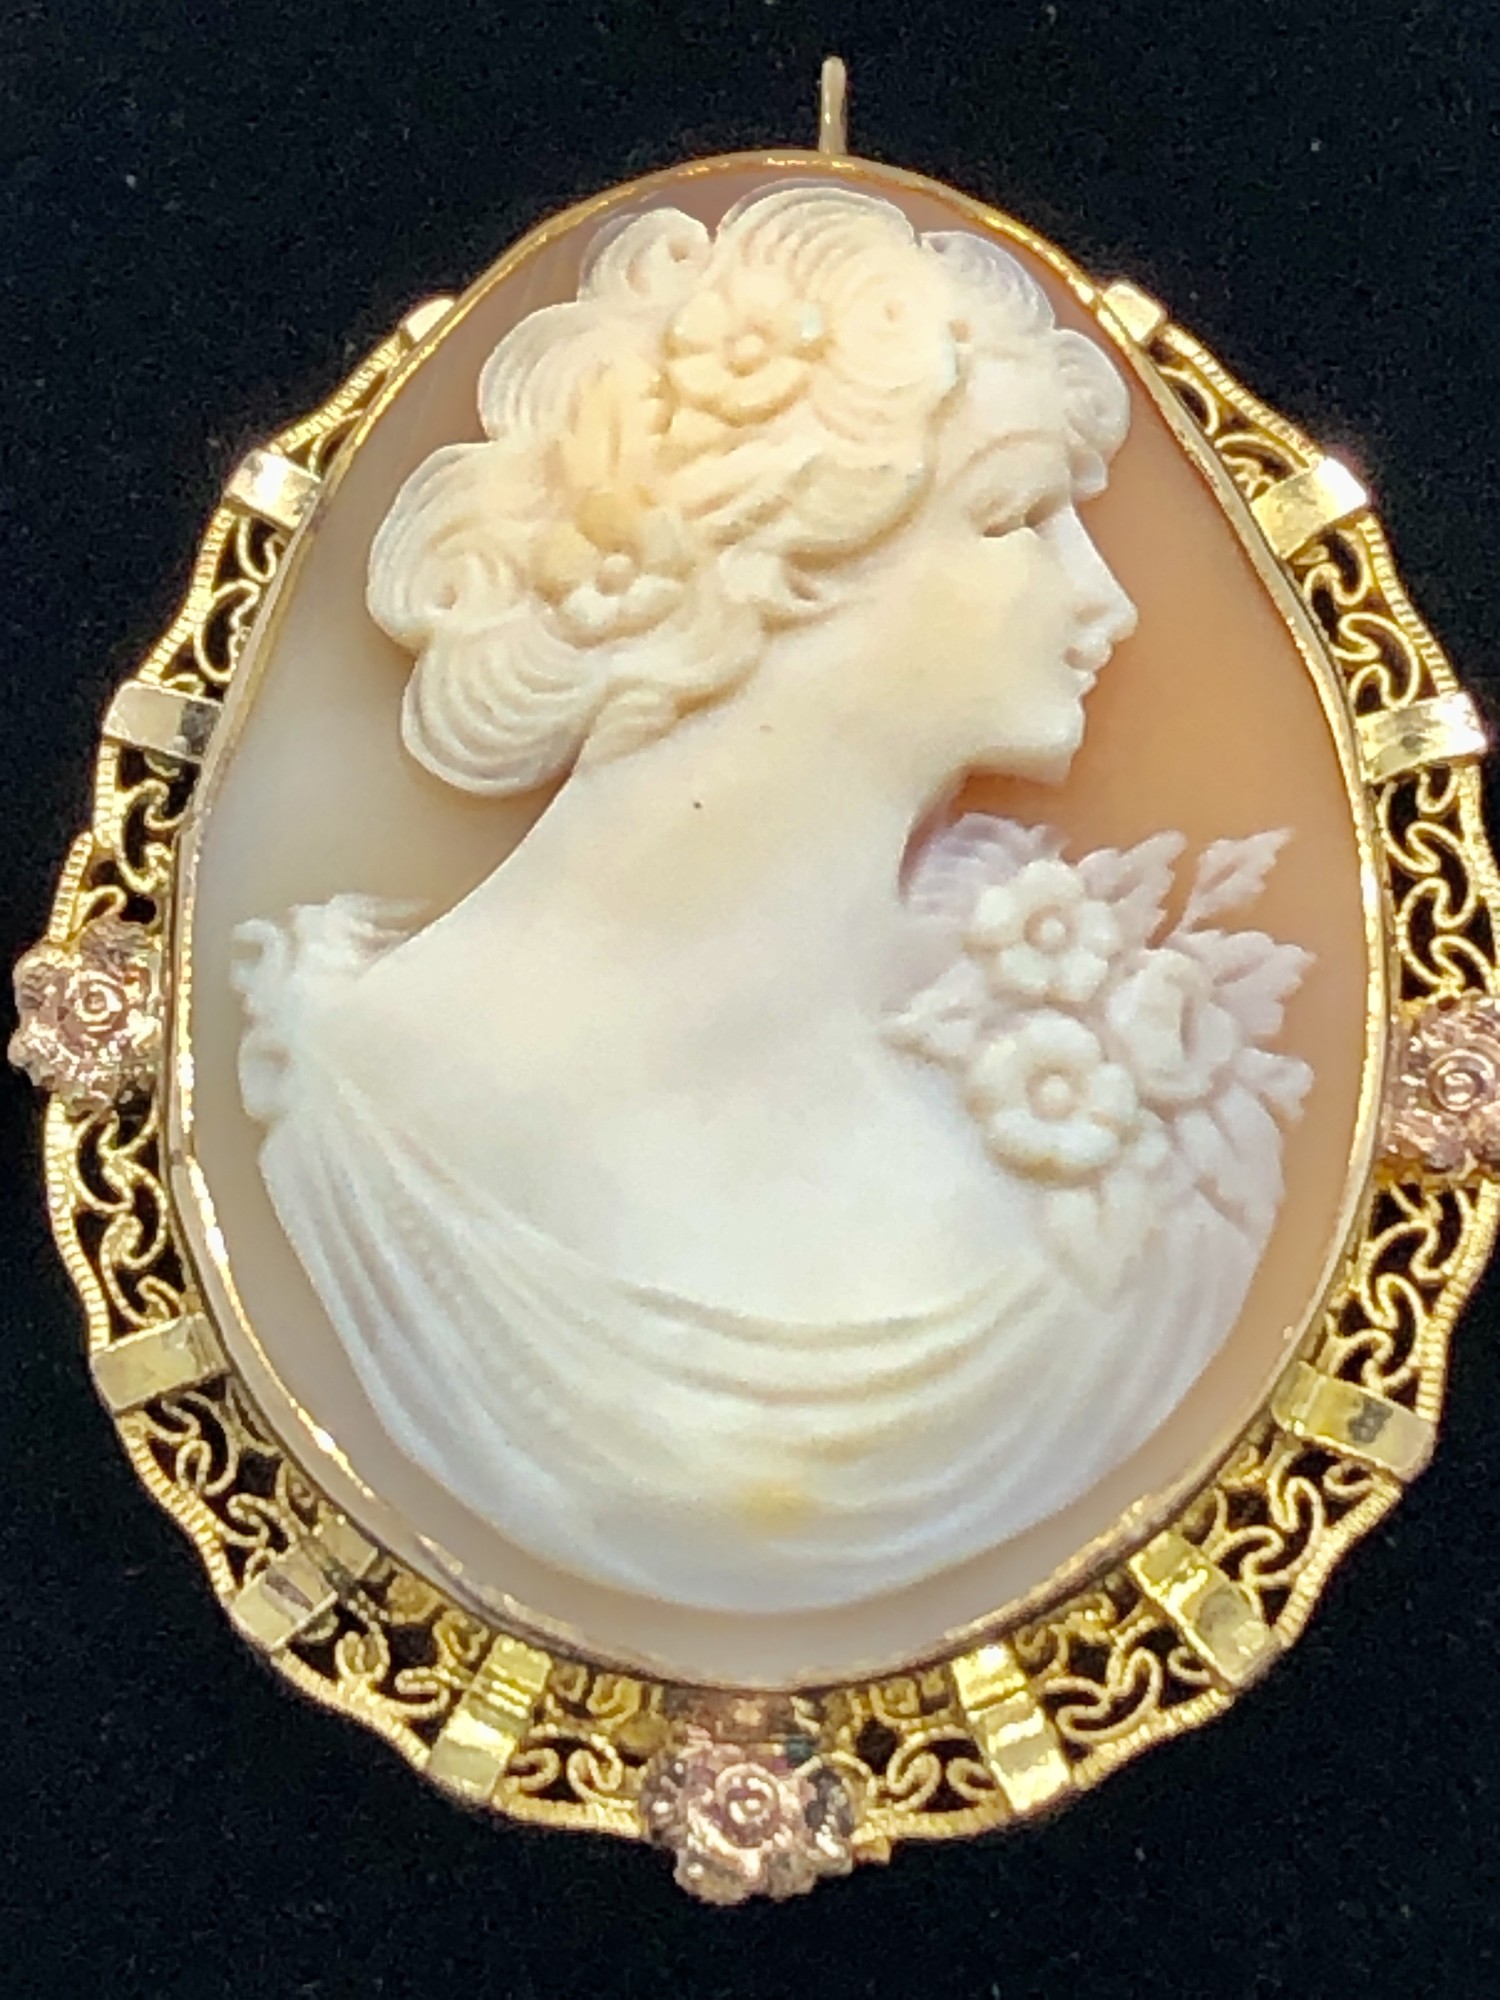 Cameo Brooch/Necklace, marked 1.200 12K (which is antique European GP).  Size: 1 3/4in. It can be worn as a brooch or a ring lifts up to put a chain through.

Will ship USPS Priority mail.